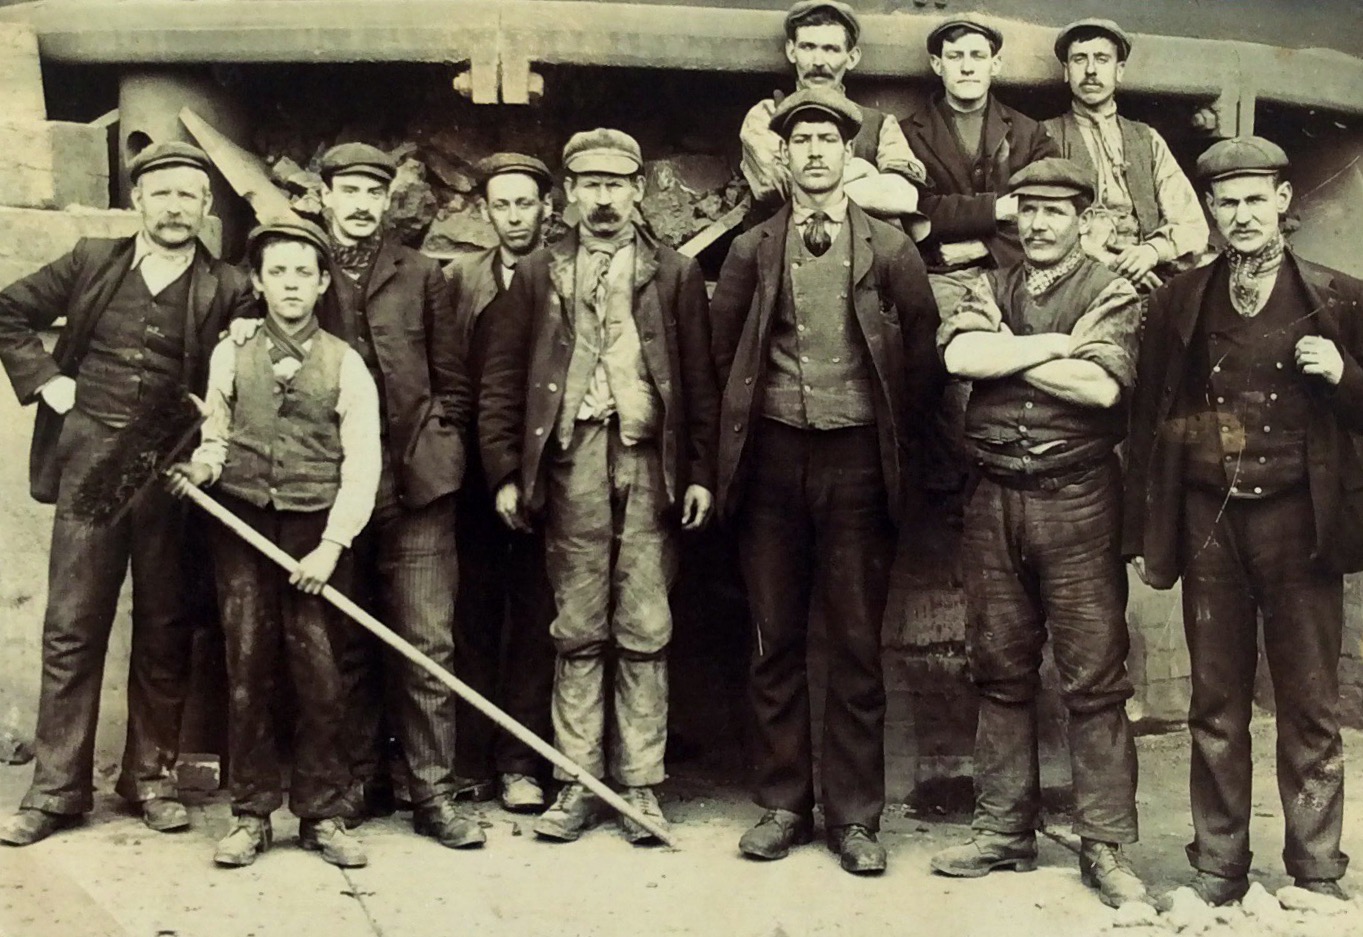 A group of 'Ironstone' labourers with my Great Great Uncle Edwin Lazenby (1886-1918). 
He is the tallest on the front row.